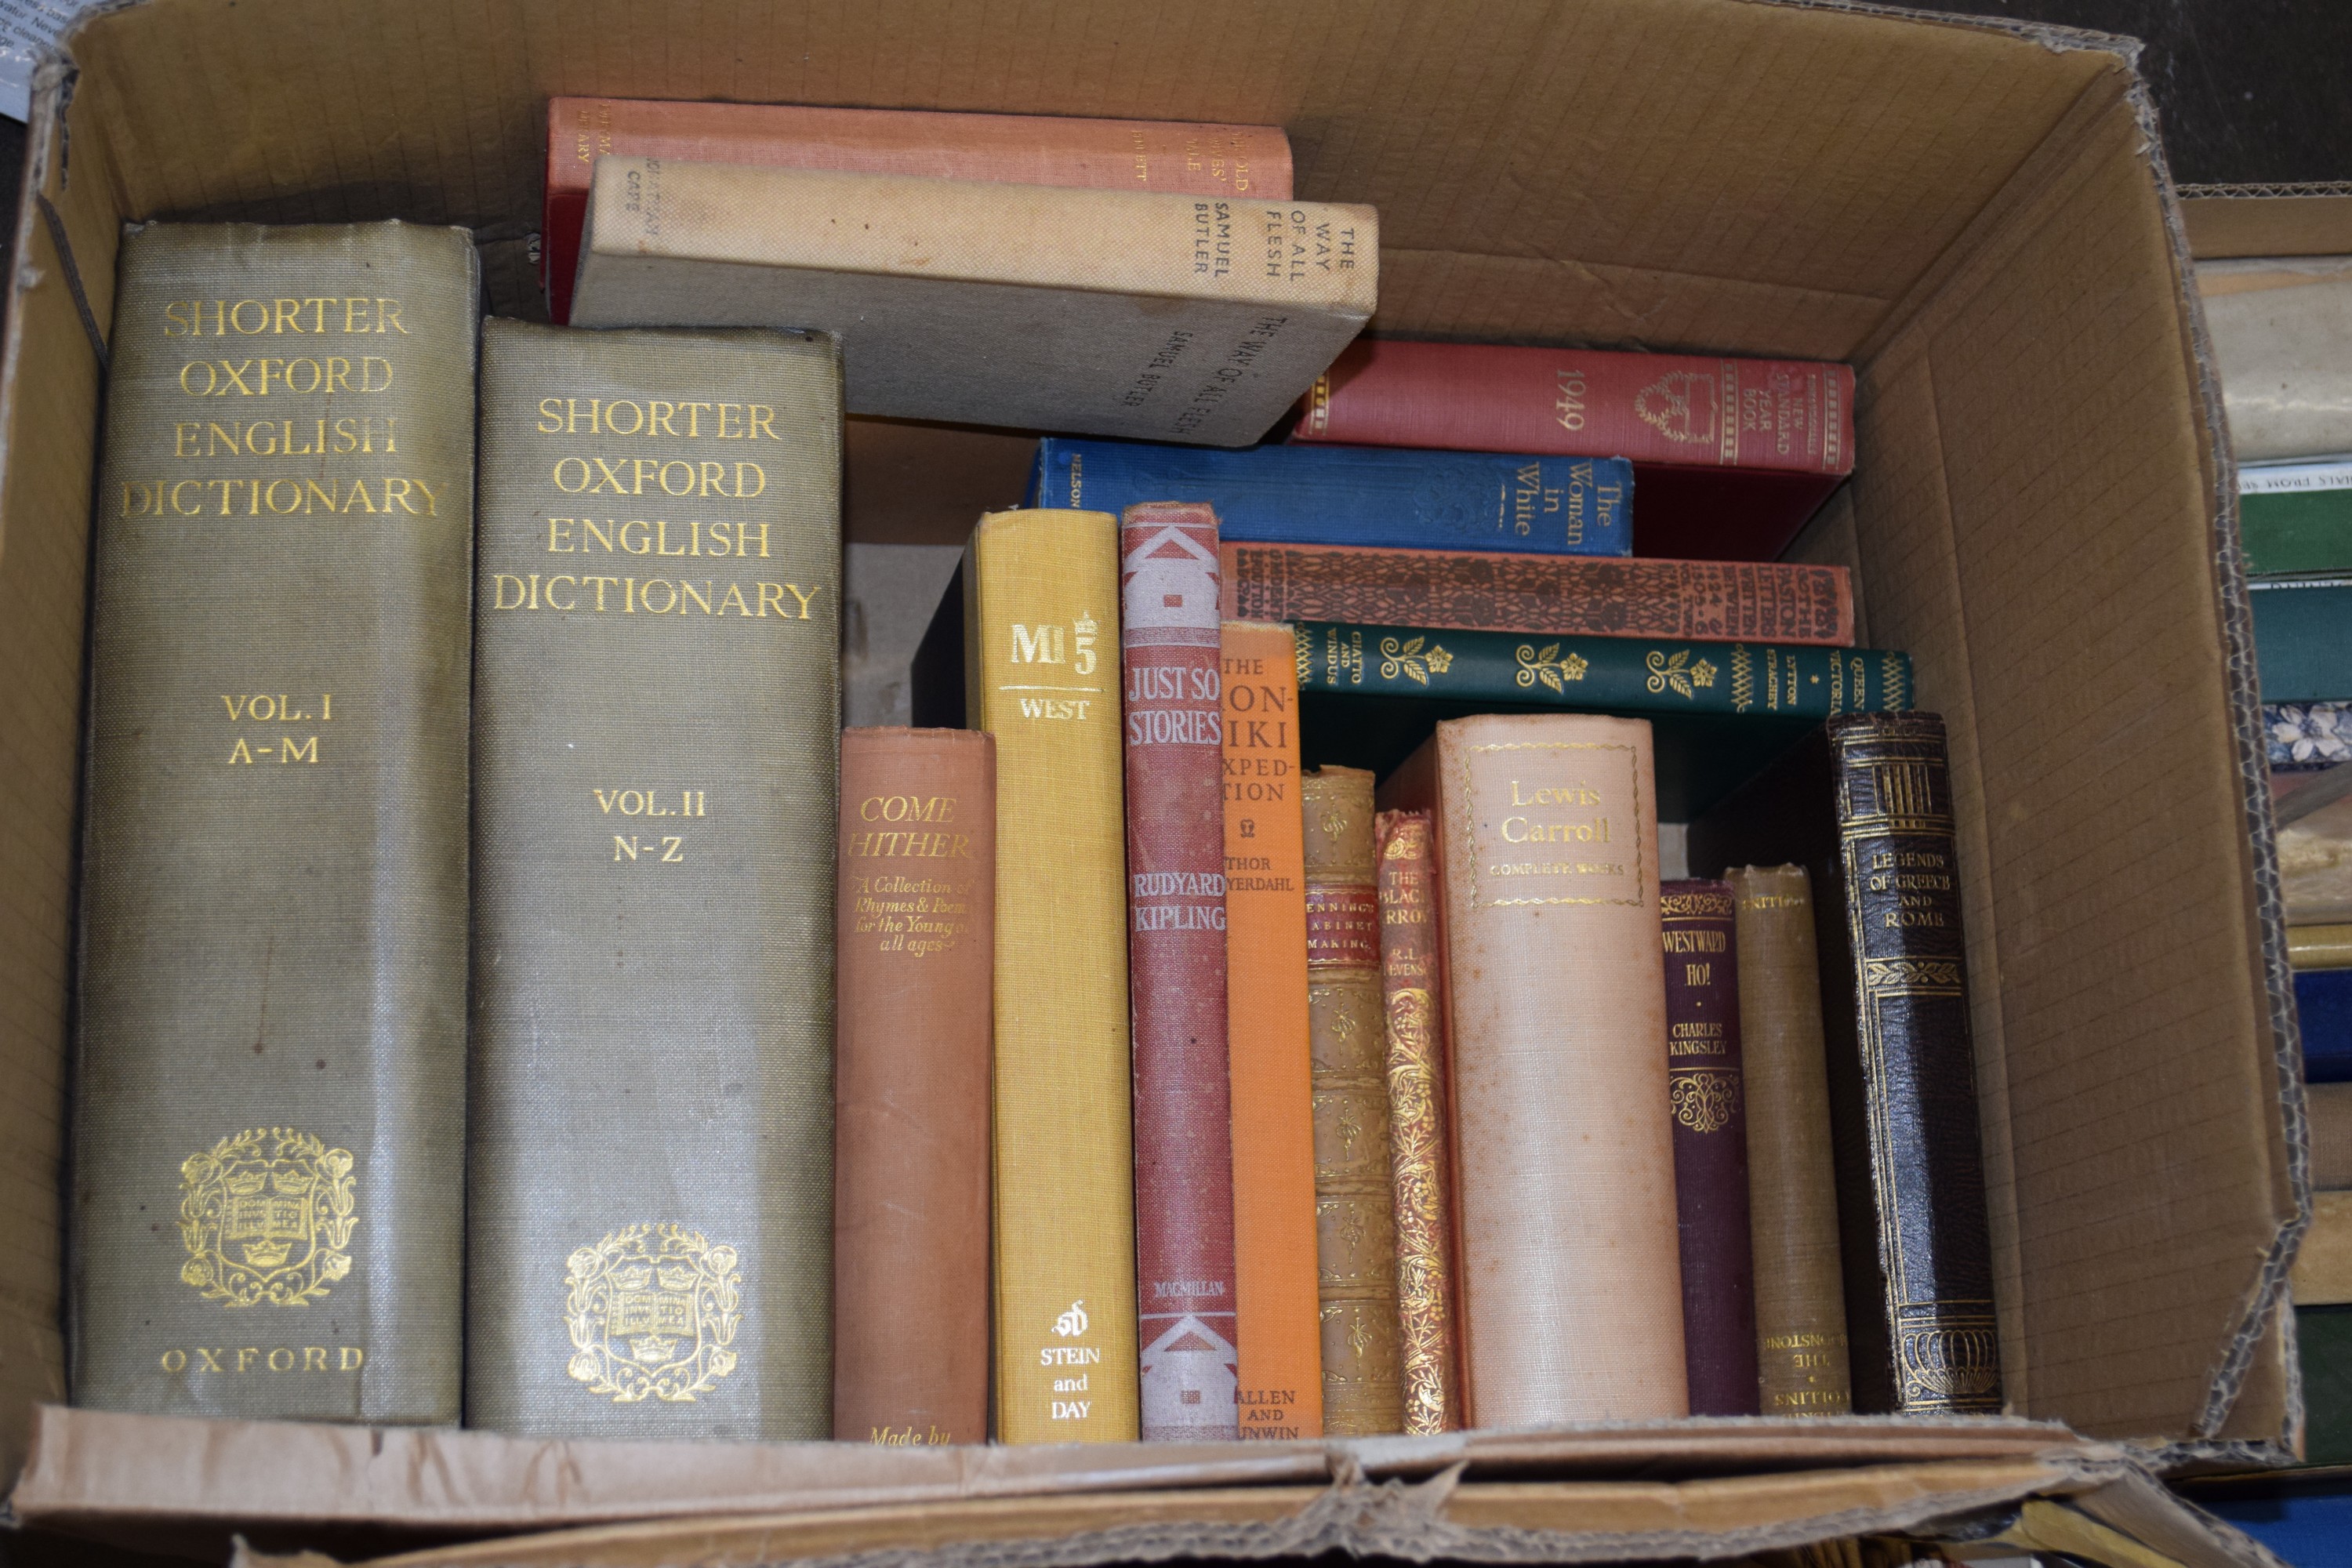 BOX OF MIXED BOOKS - SHORTER OXFORD ENGLISH DICTIONARY VOLS 1 AND 2, LEWIS CARROLL COMPLETE WORKS,